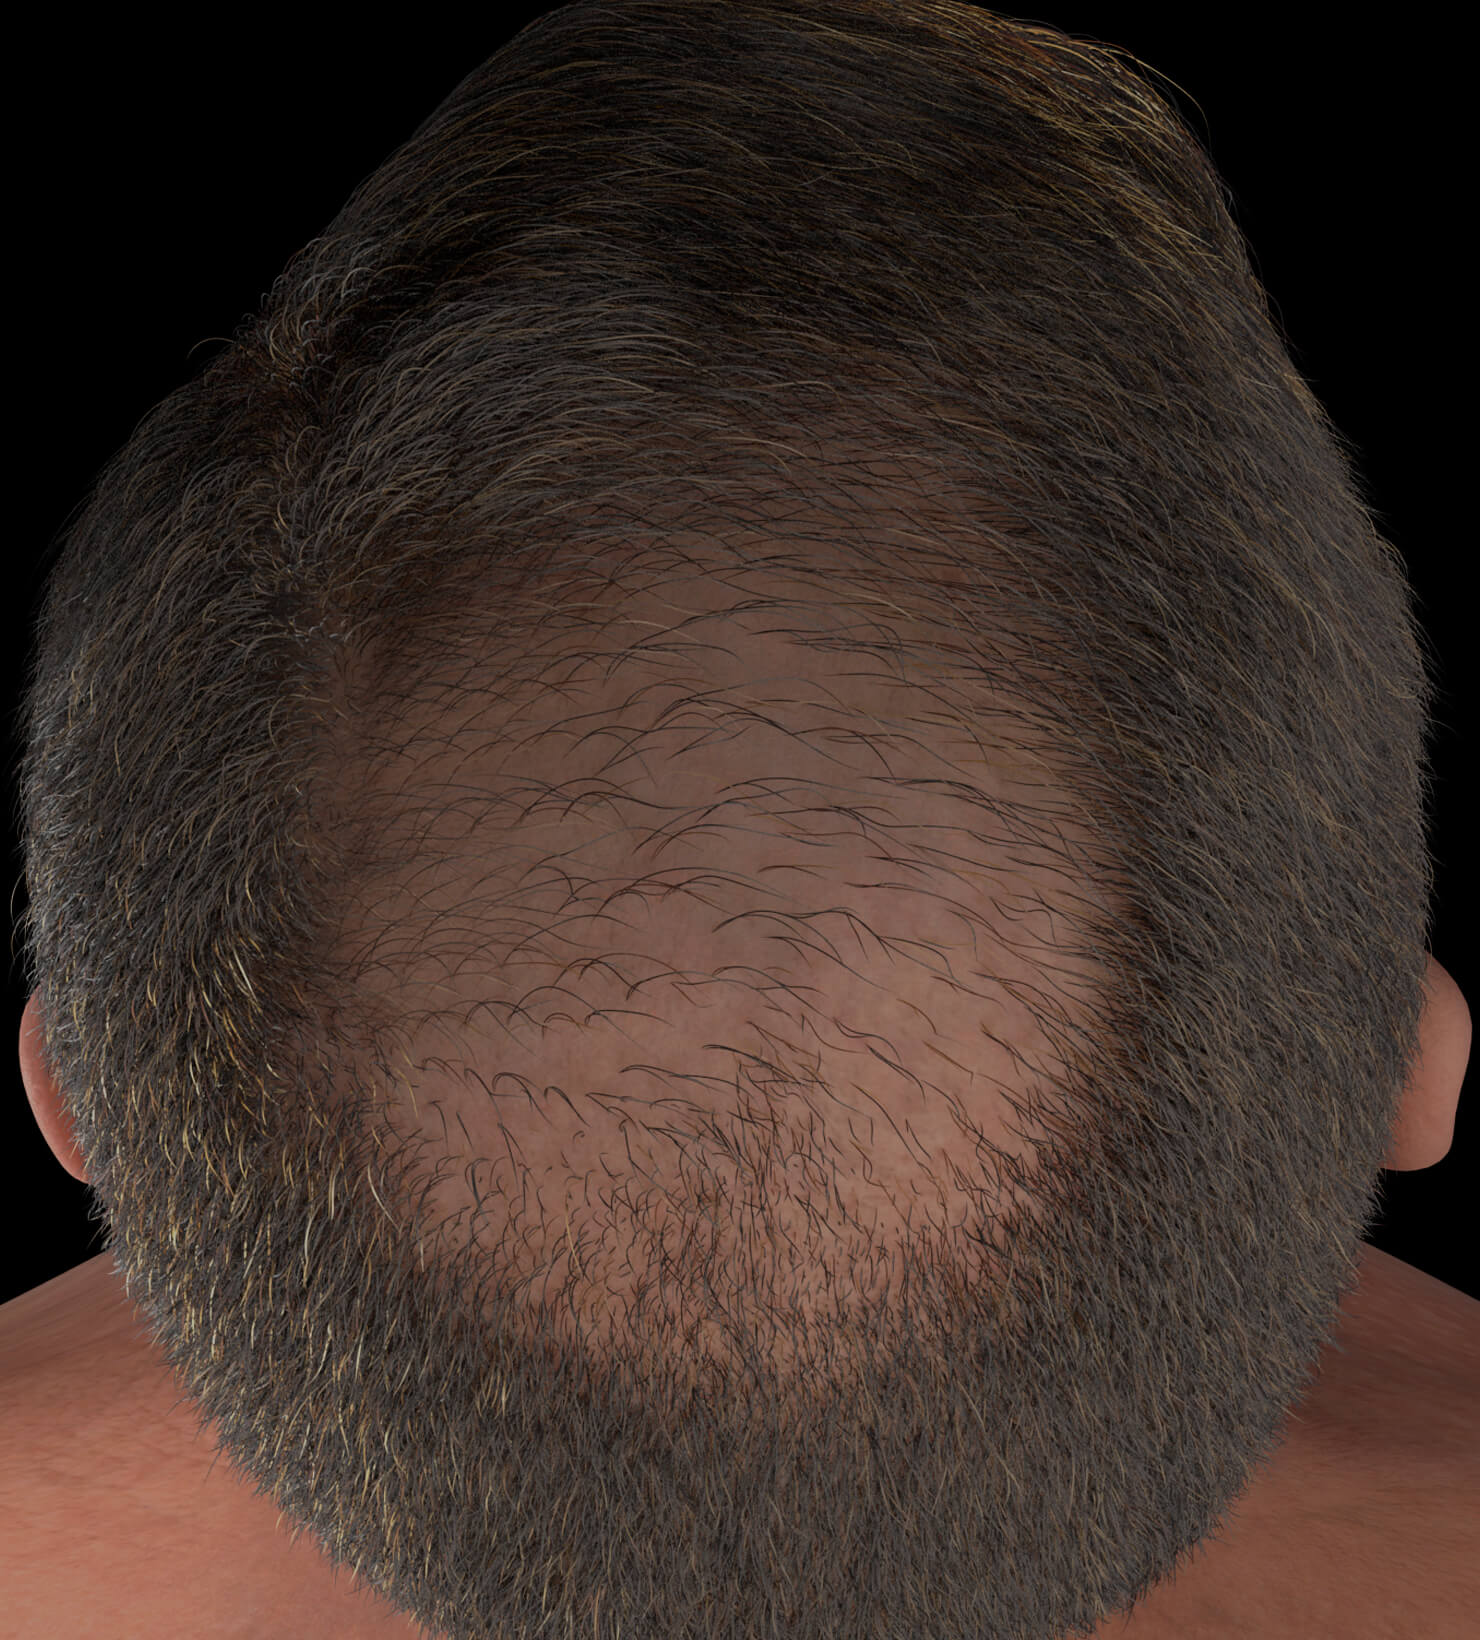 Clinique Chloé male patient with advanced hair loss treated with platelet-rich plasma, or PRP